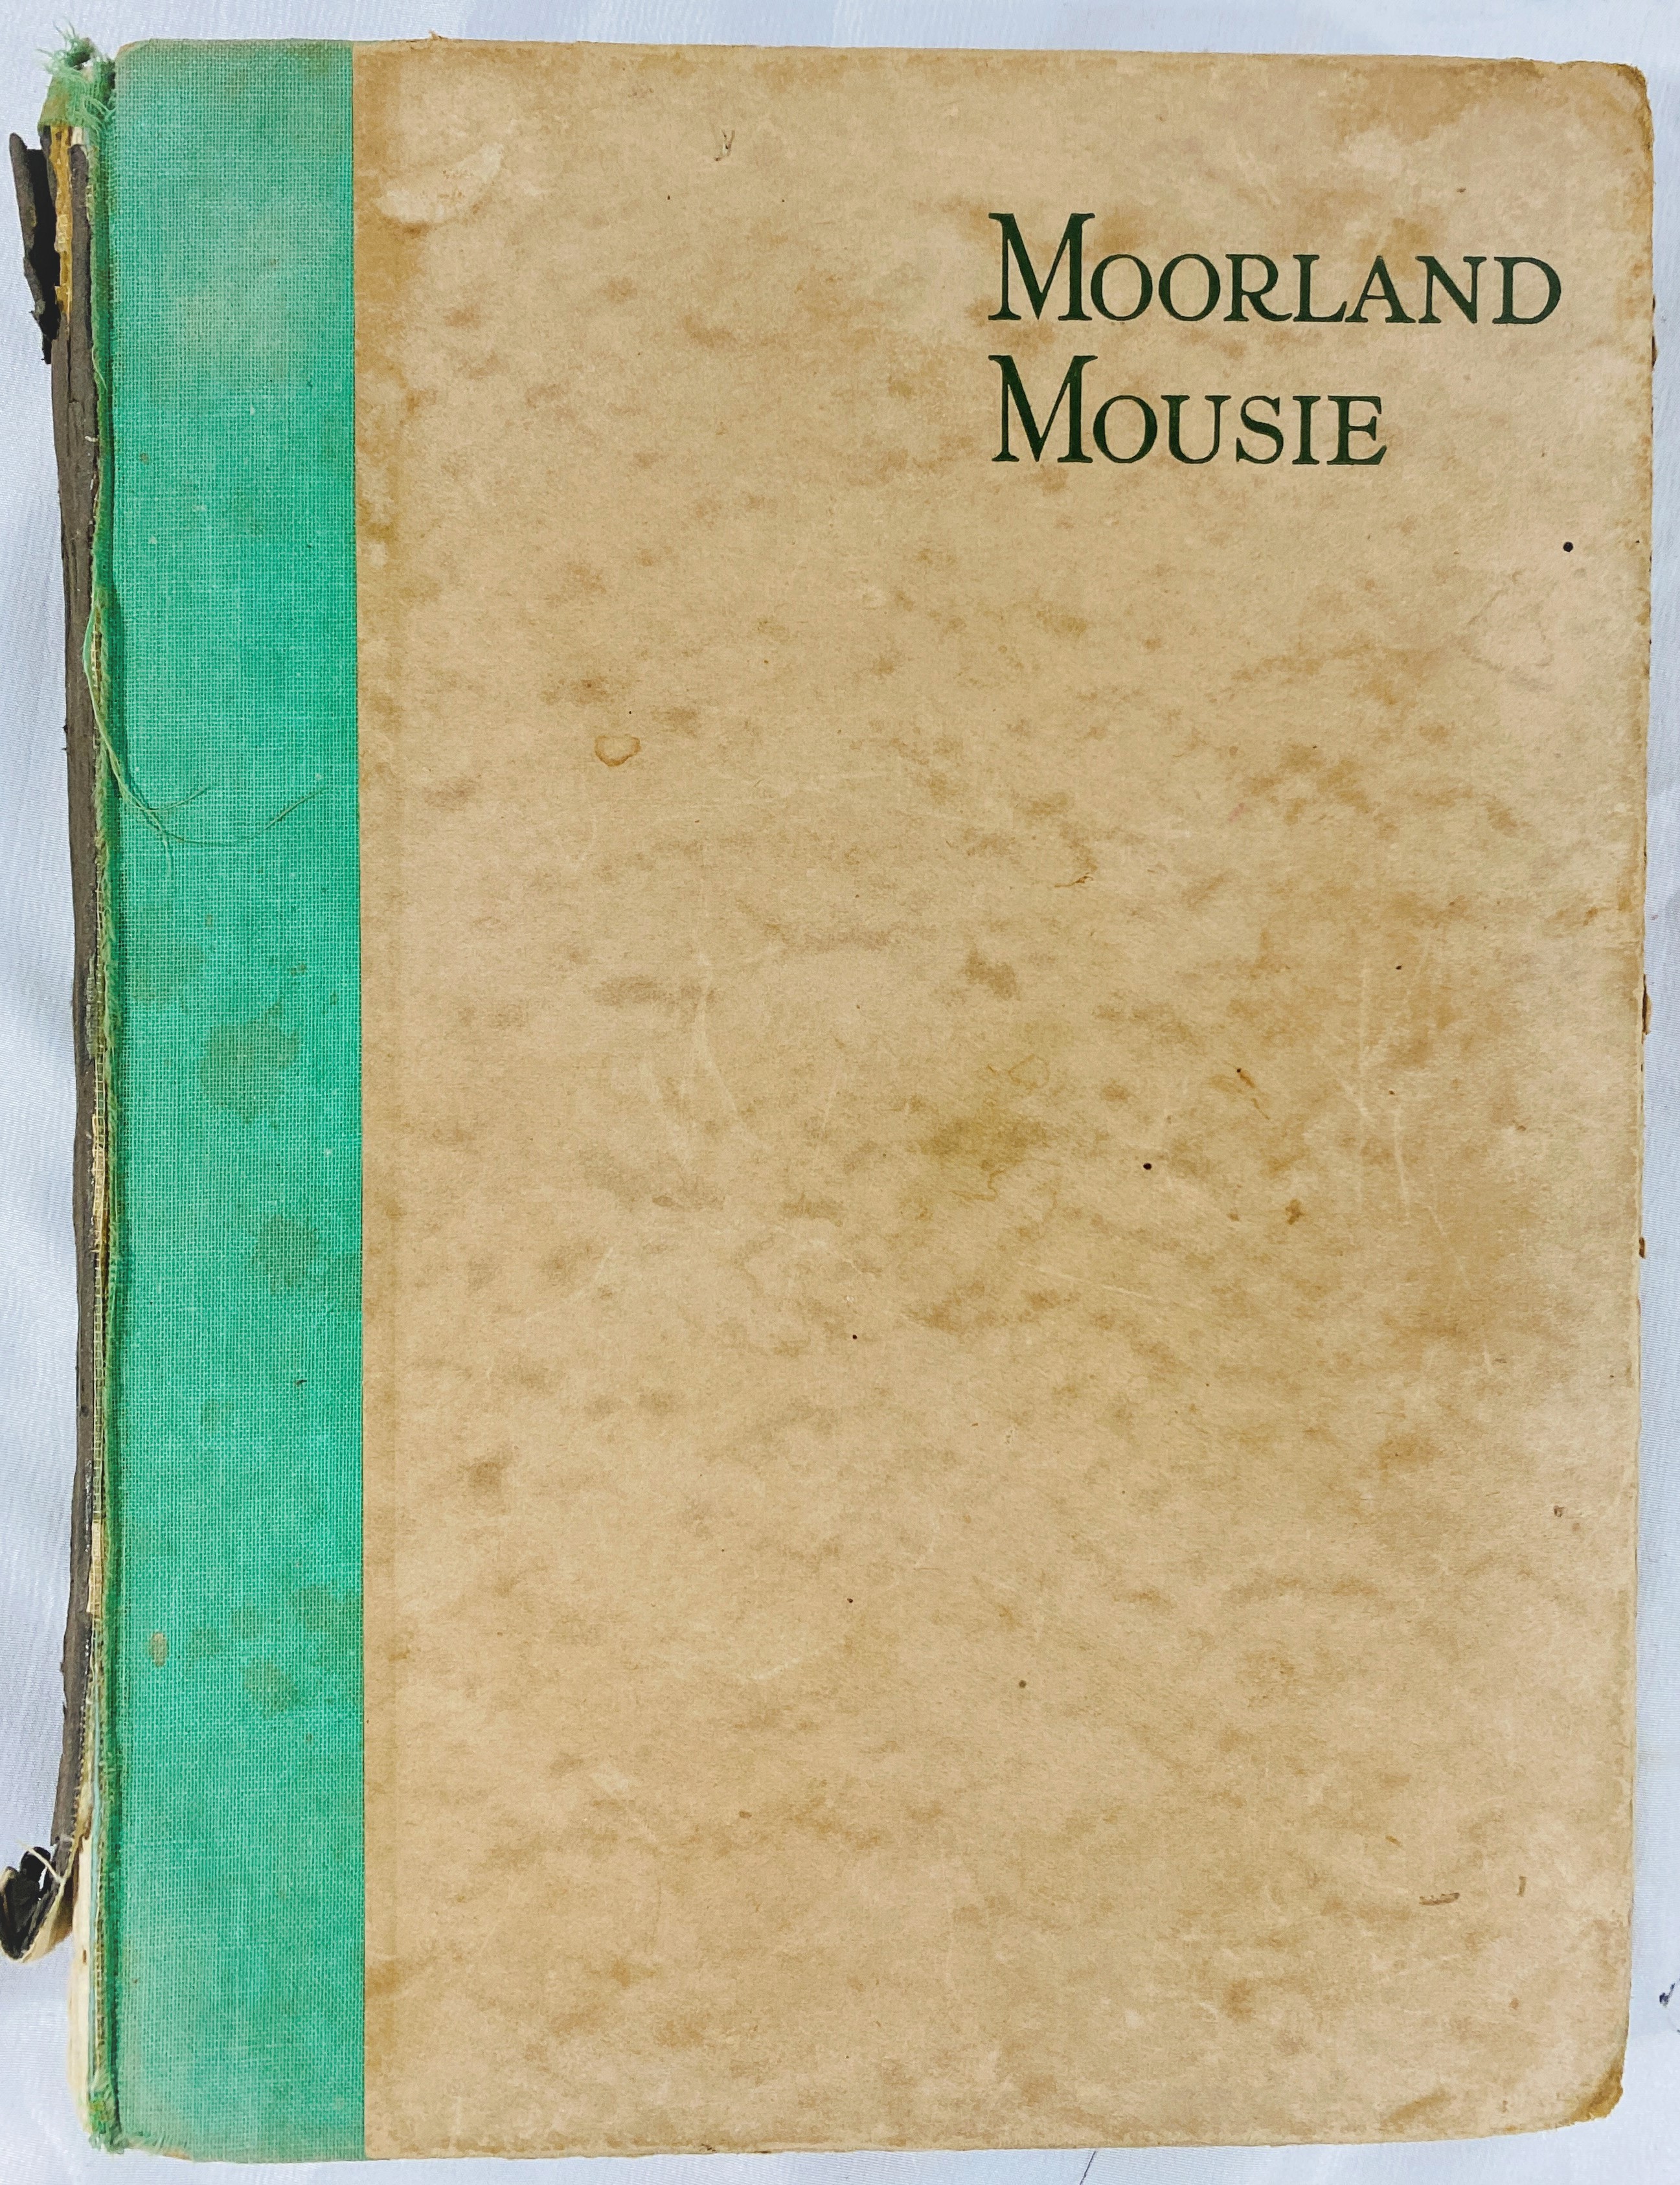 Edwards, Lionel - Seen from the Saddle, 1937; with The Silent Horn, 1938; and Moorland Mousie. - Image 2 of 8